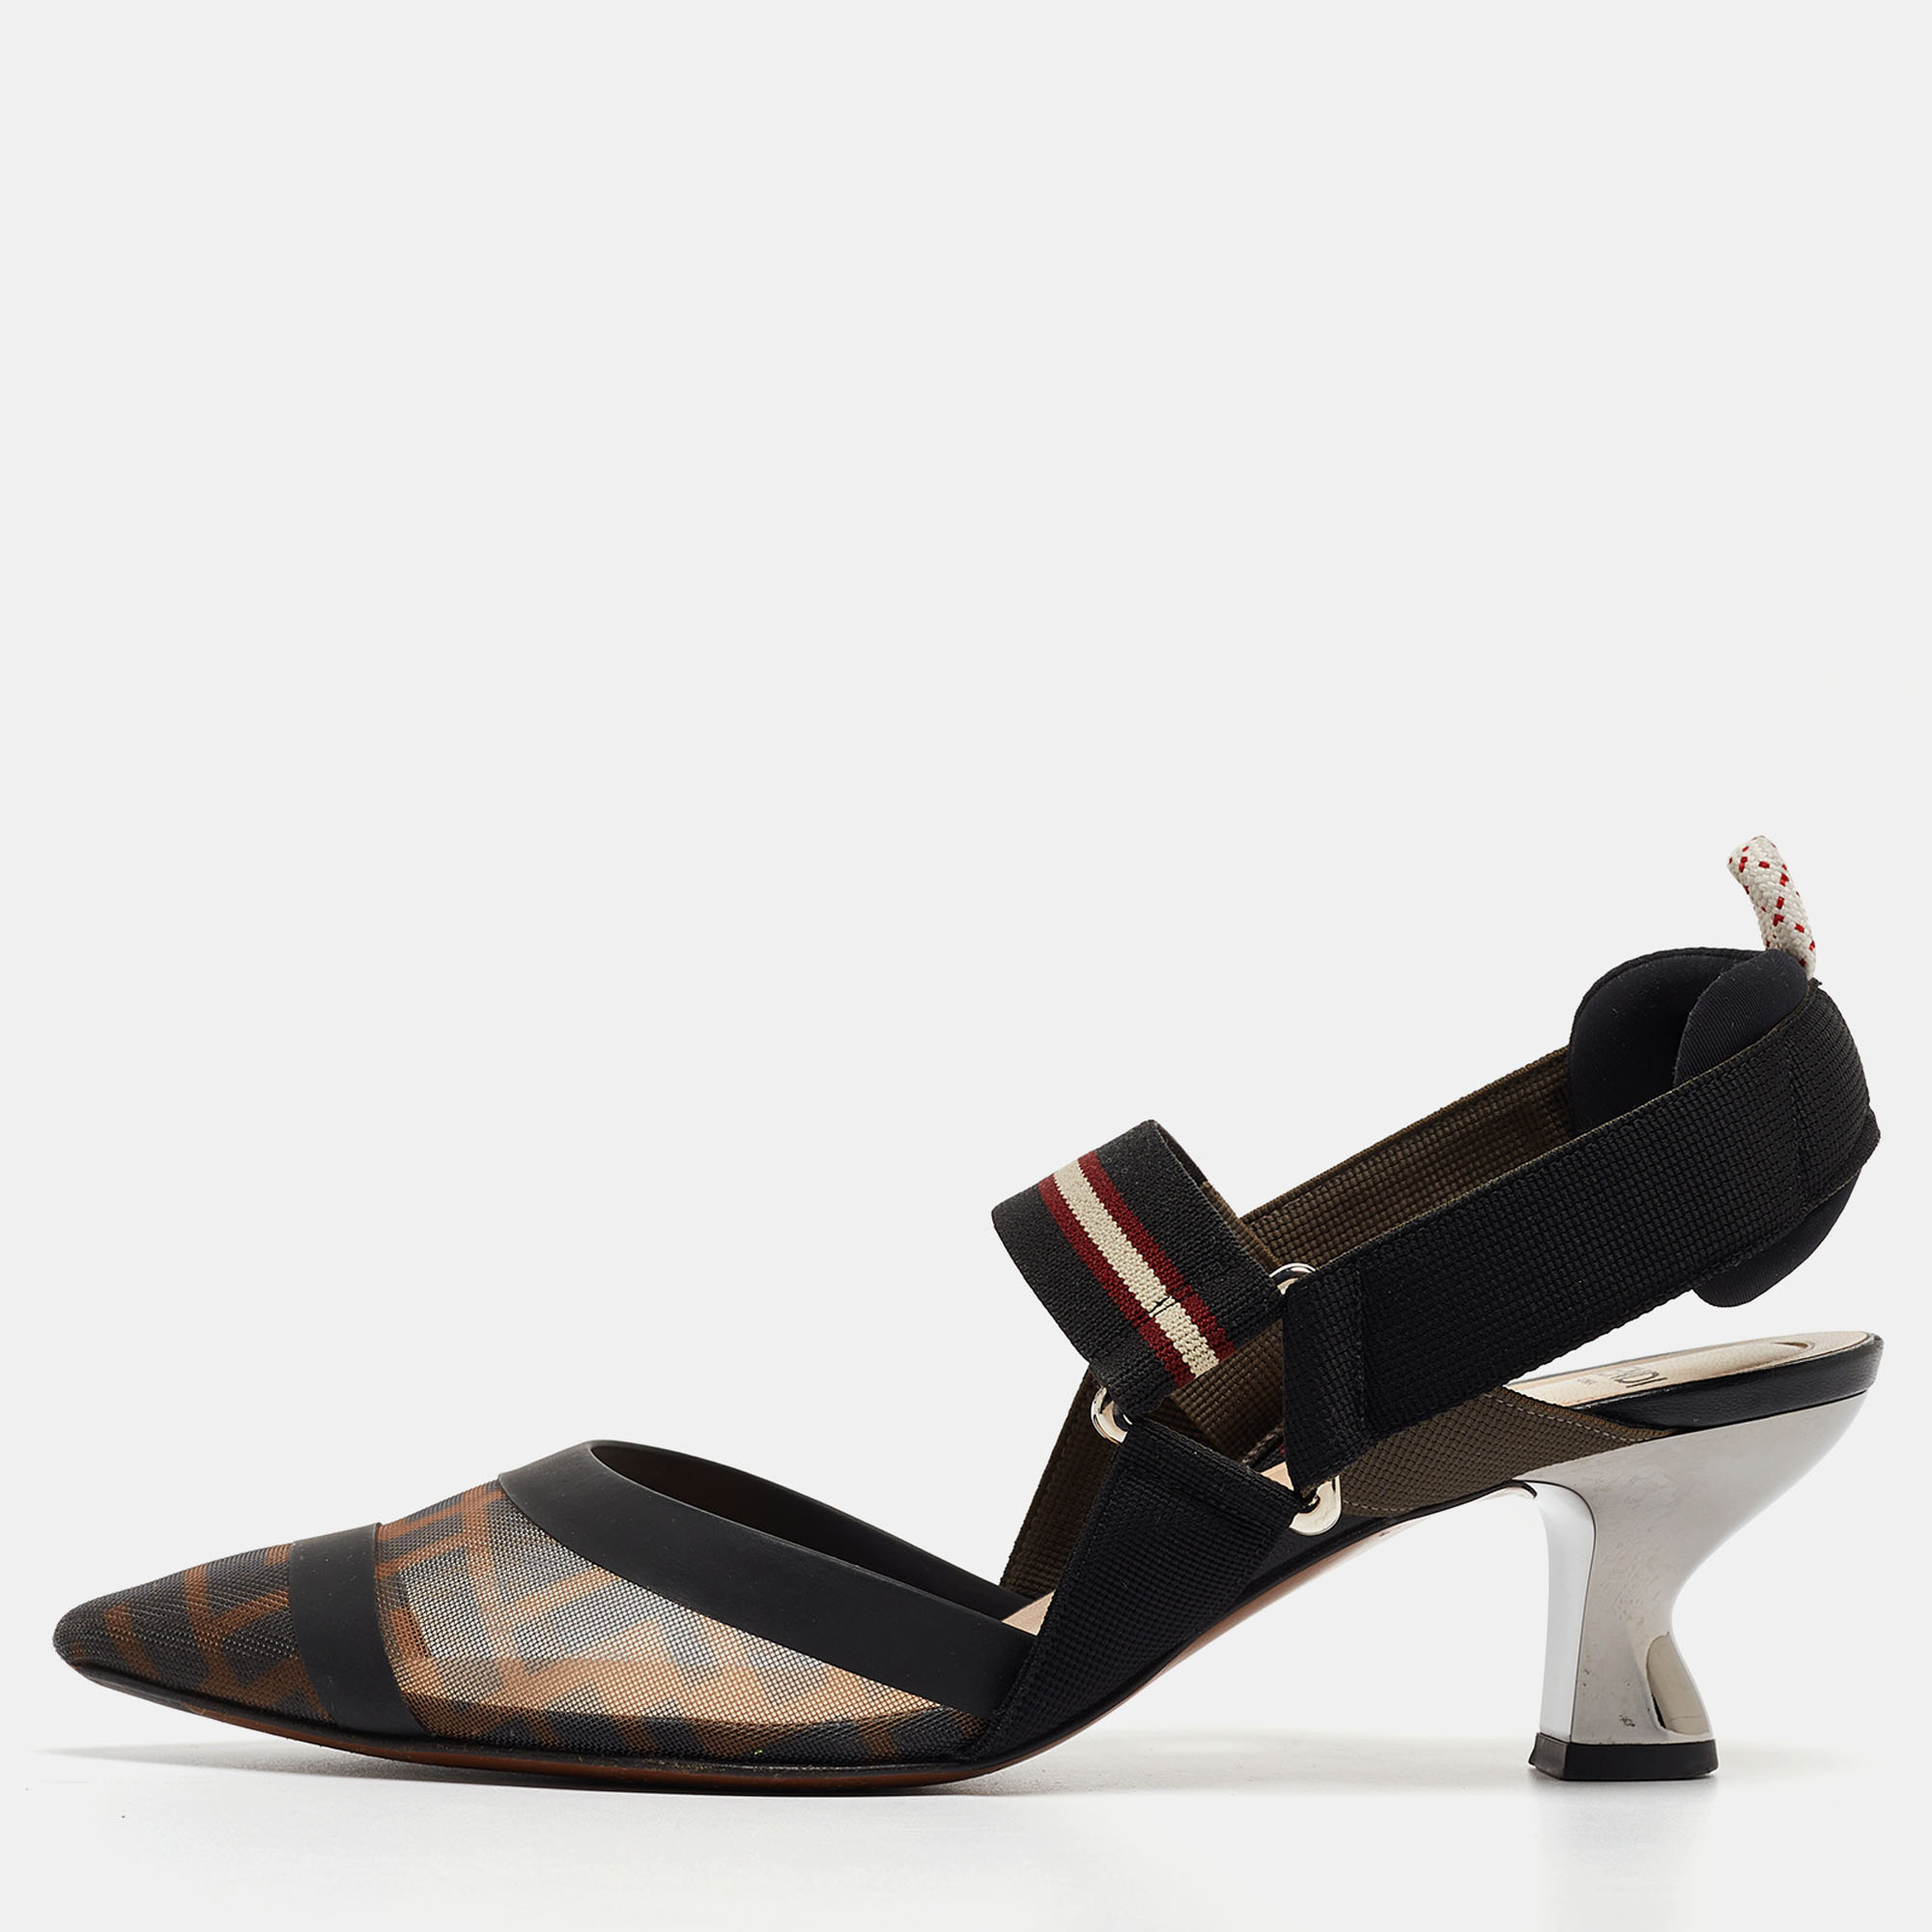 Make a statement with these Fendi pumps for women. Impeccably crafted these chic heels offer both fashion and comfort elevating your look with each graceful step.